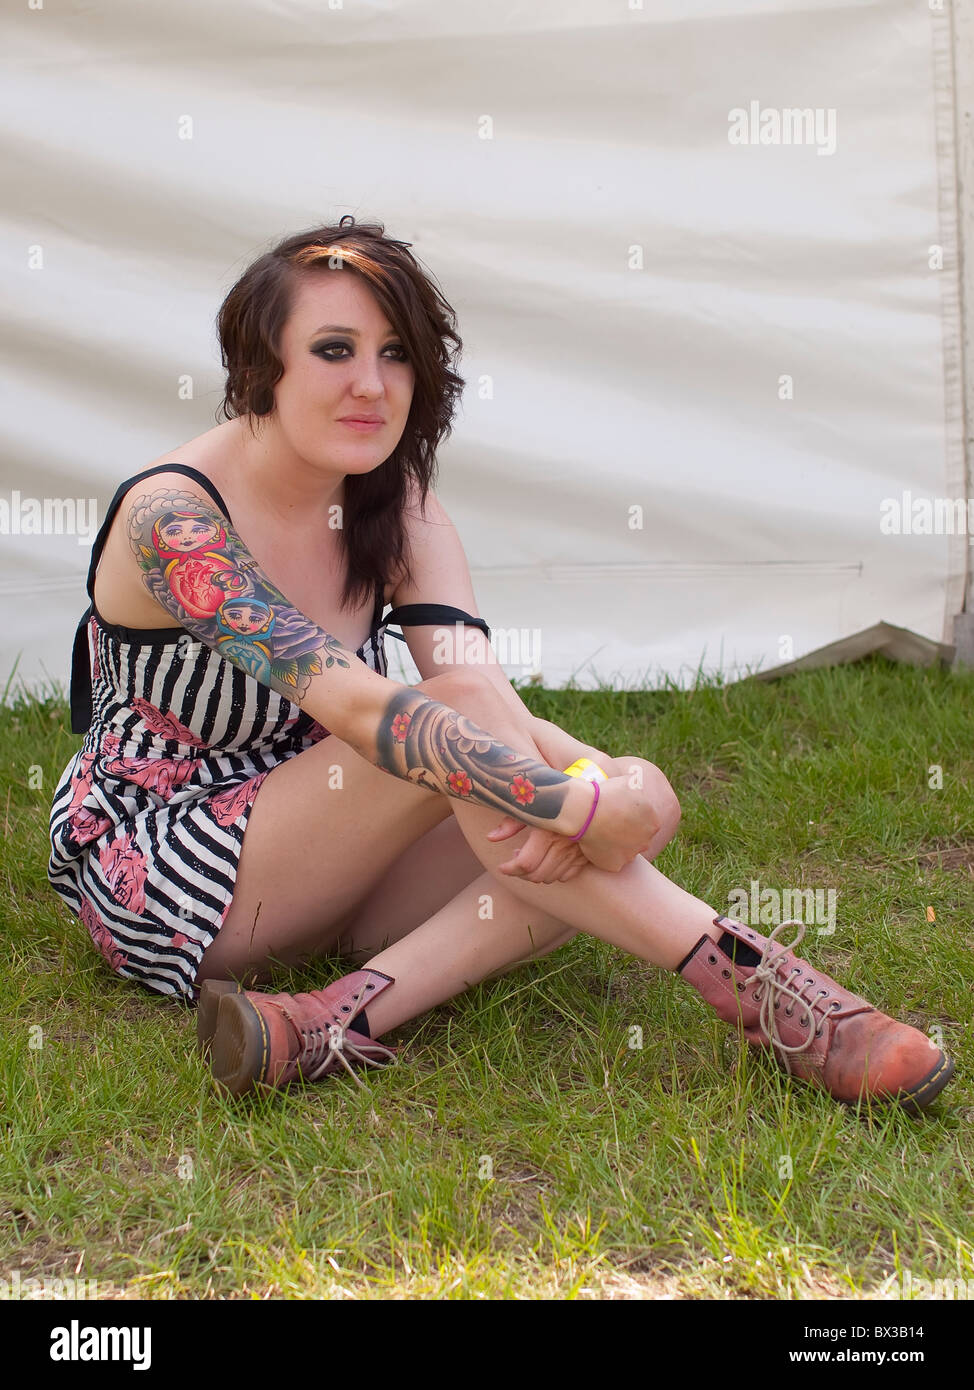 Lucy a trendy young female adult nineteen year old with tattoos Stock Photo